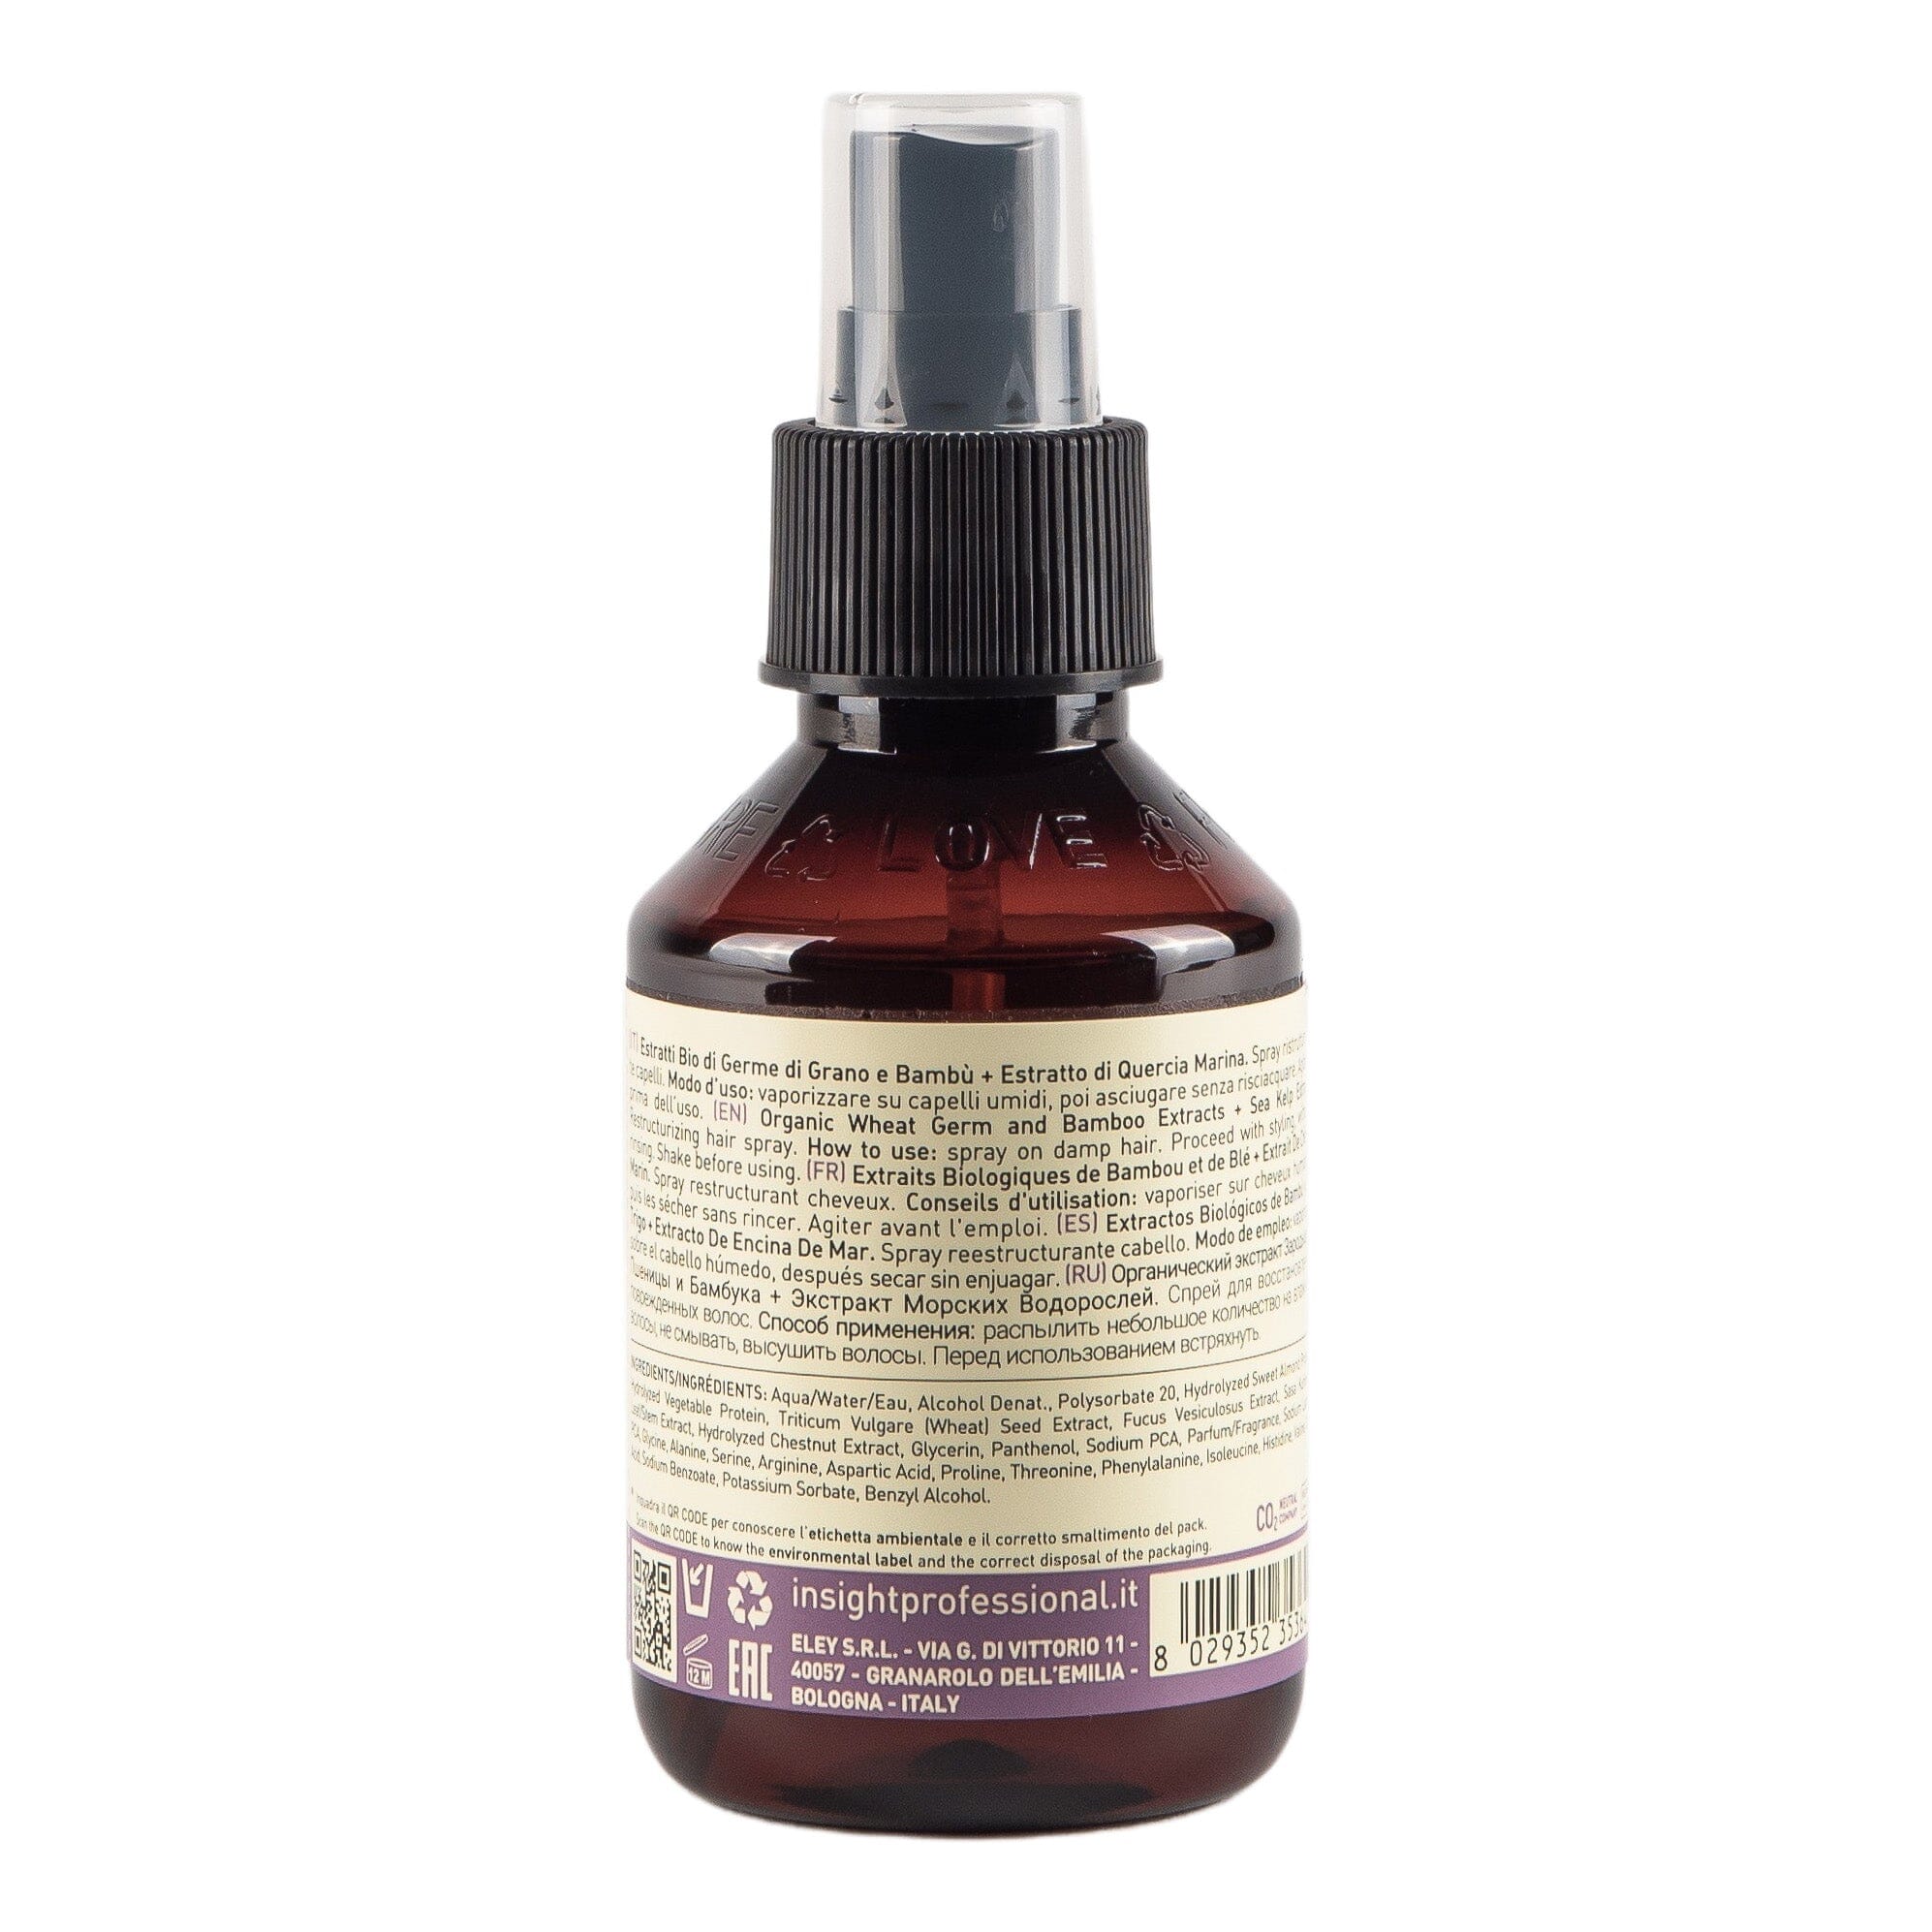 Insight Damaged Hair - Restructurizing Leave-in spray